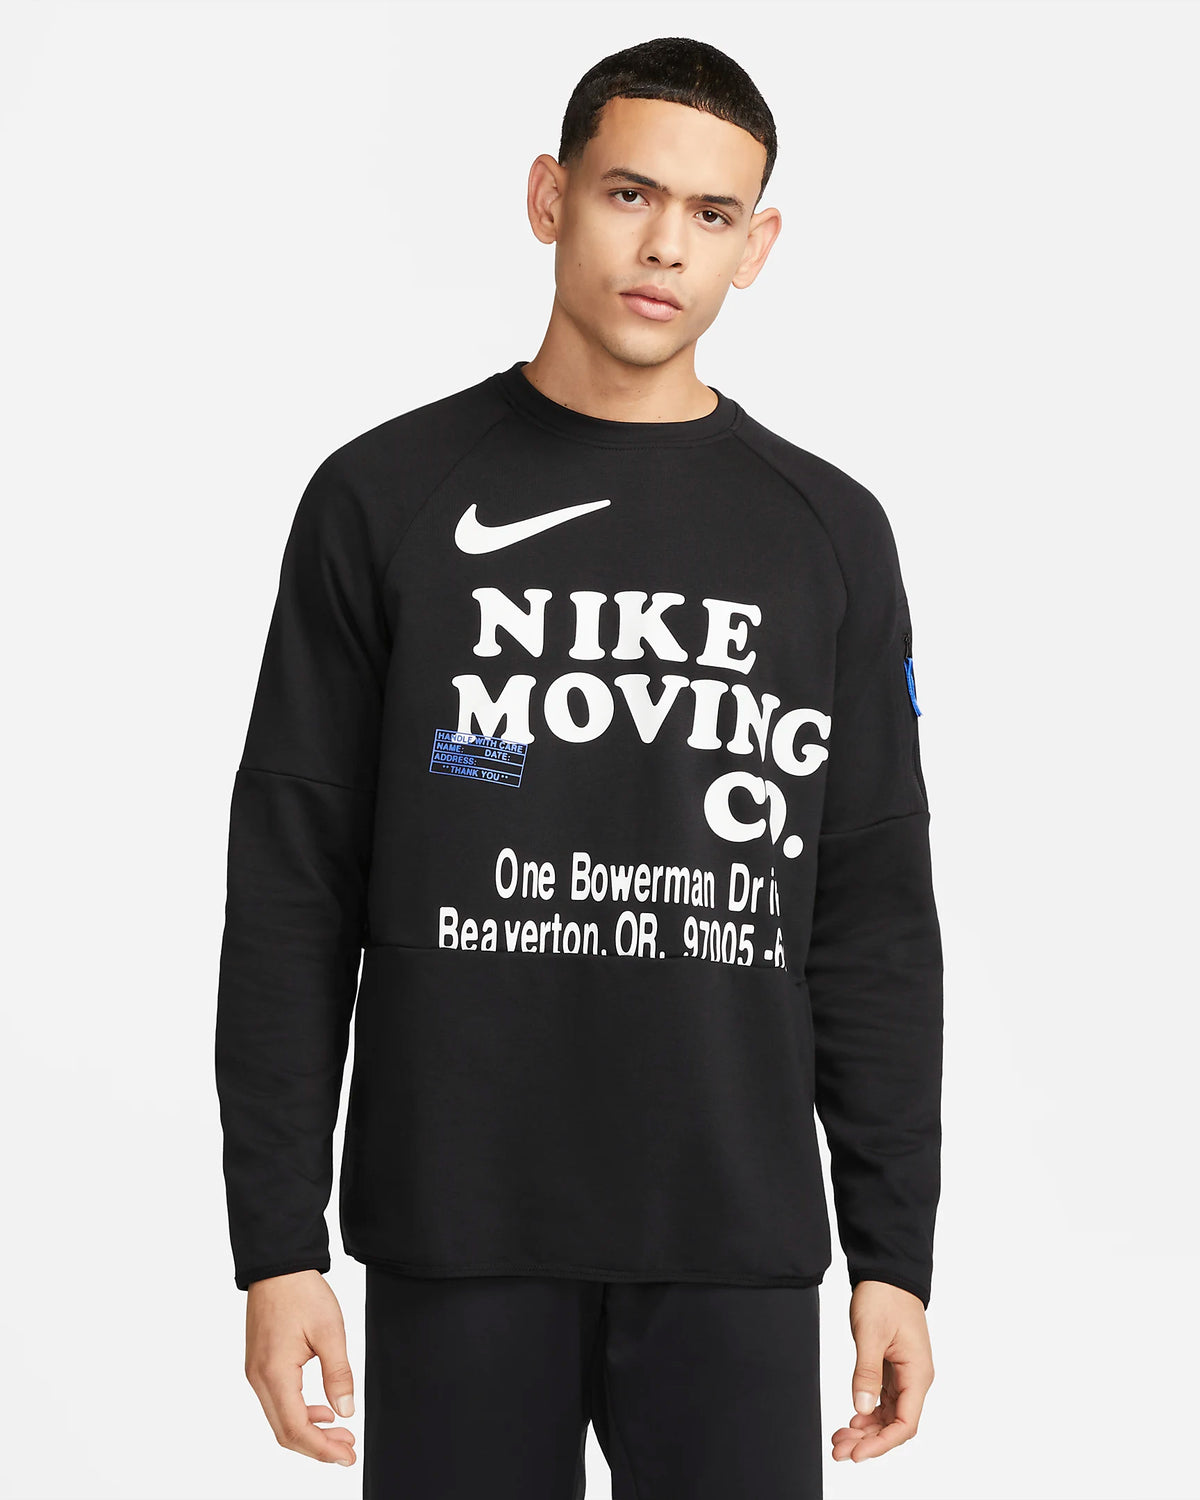 Nike Dri Fit Moving Co. Long Sleeve Sweater